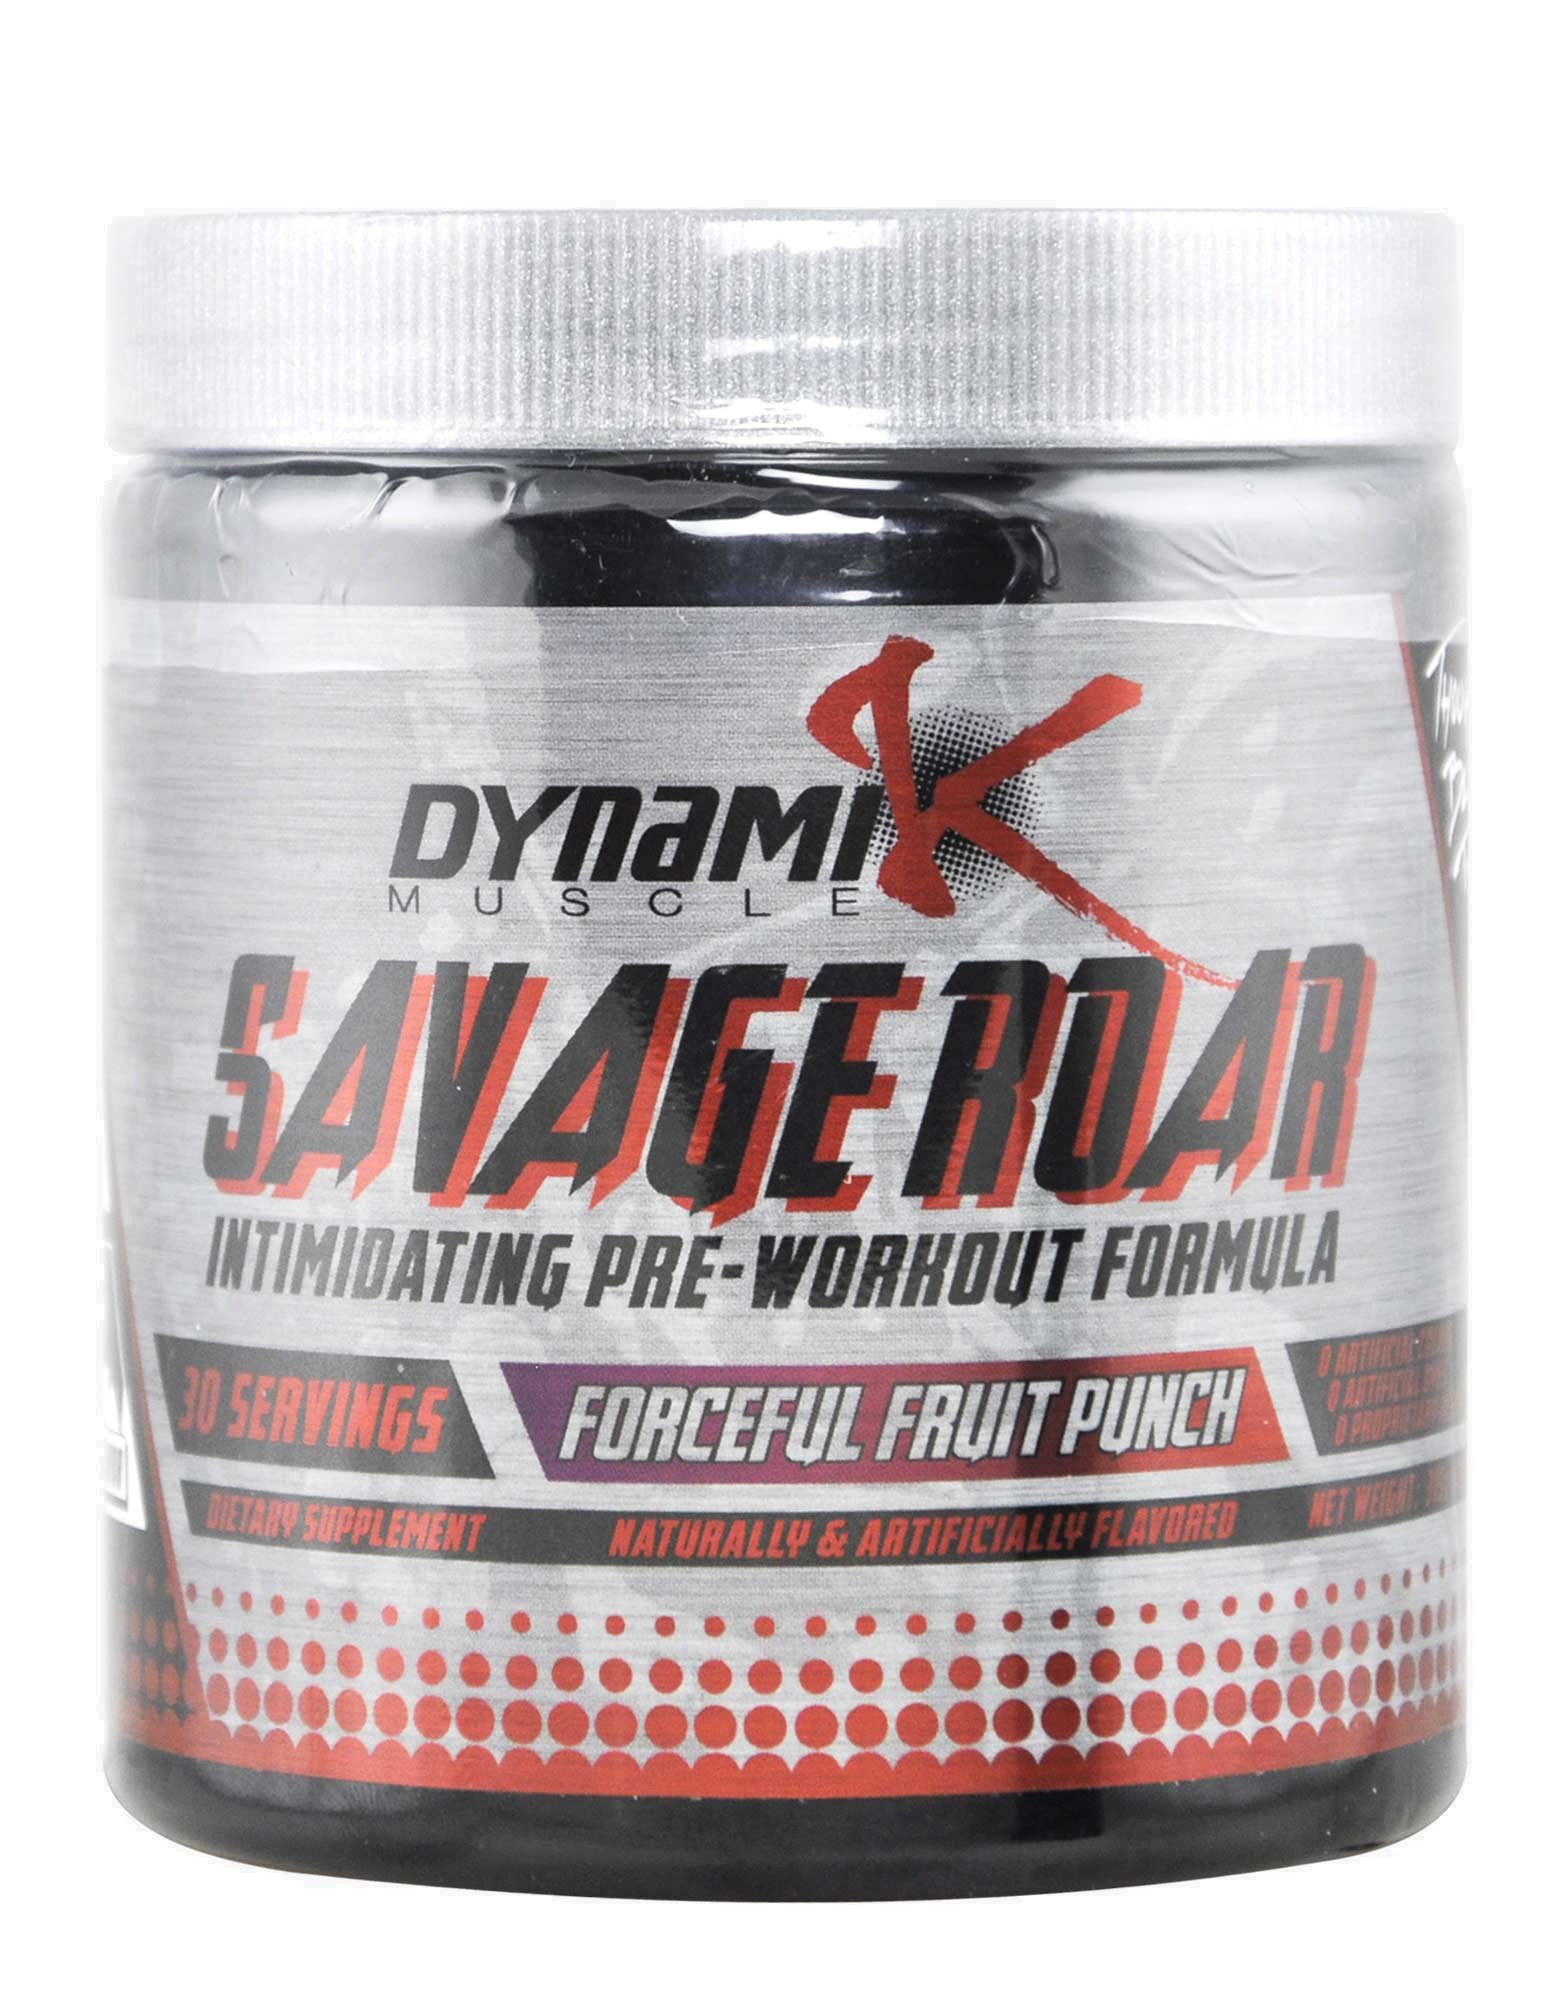  Savage Roar Pre Workout for push your ABS